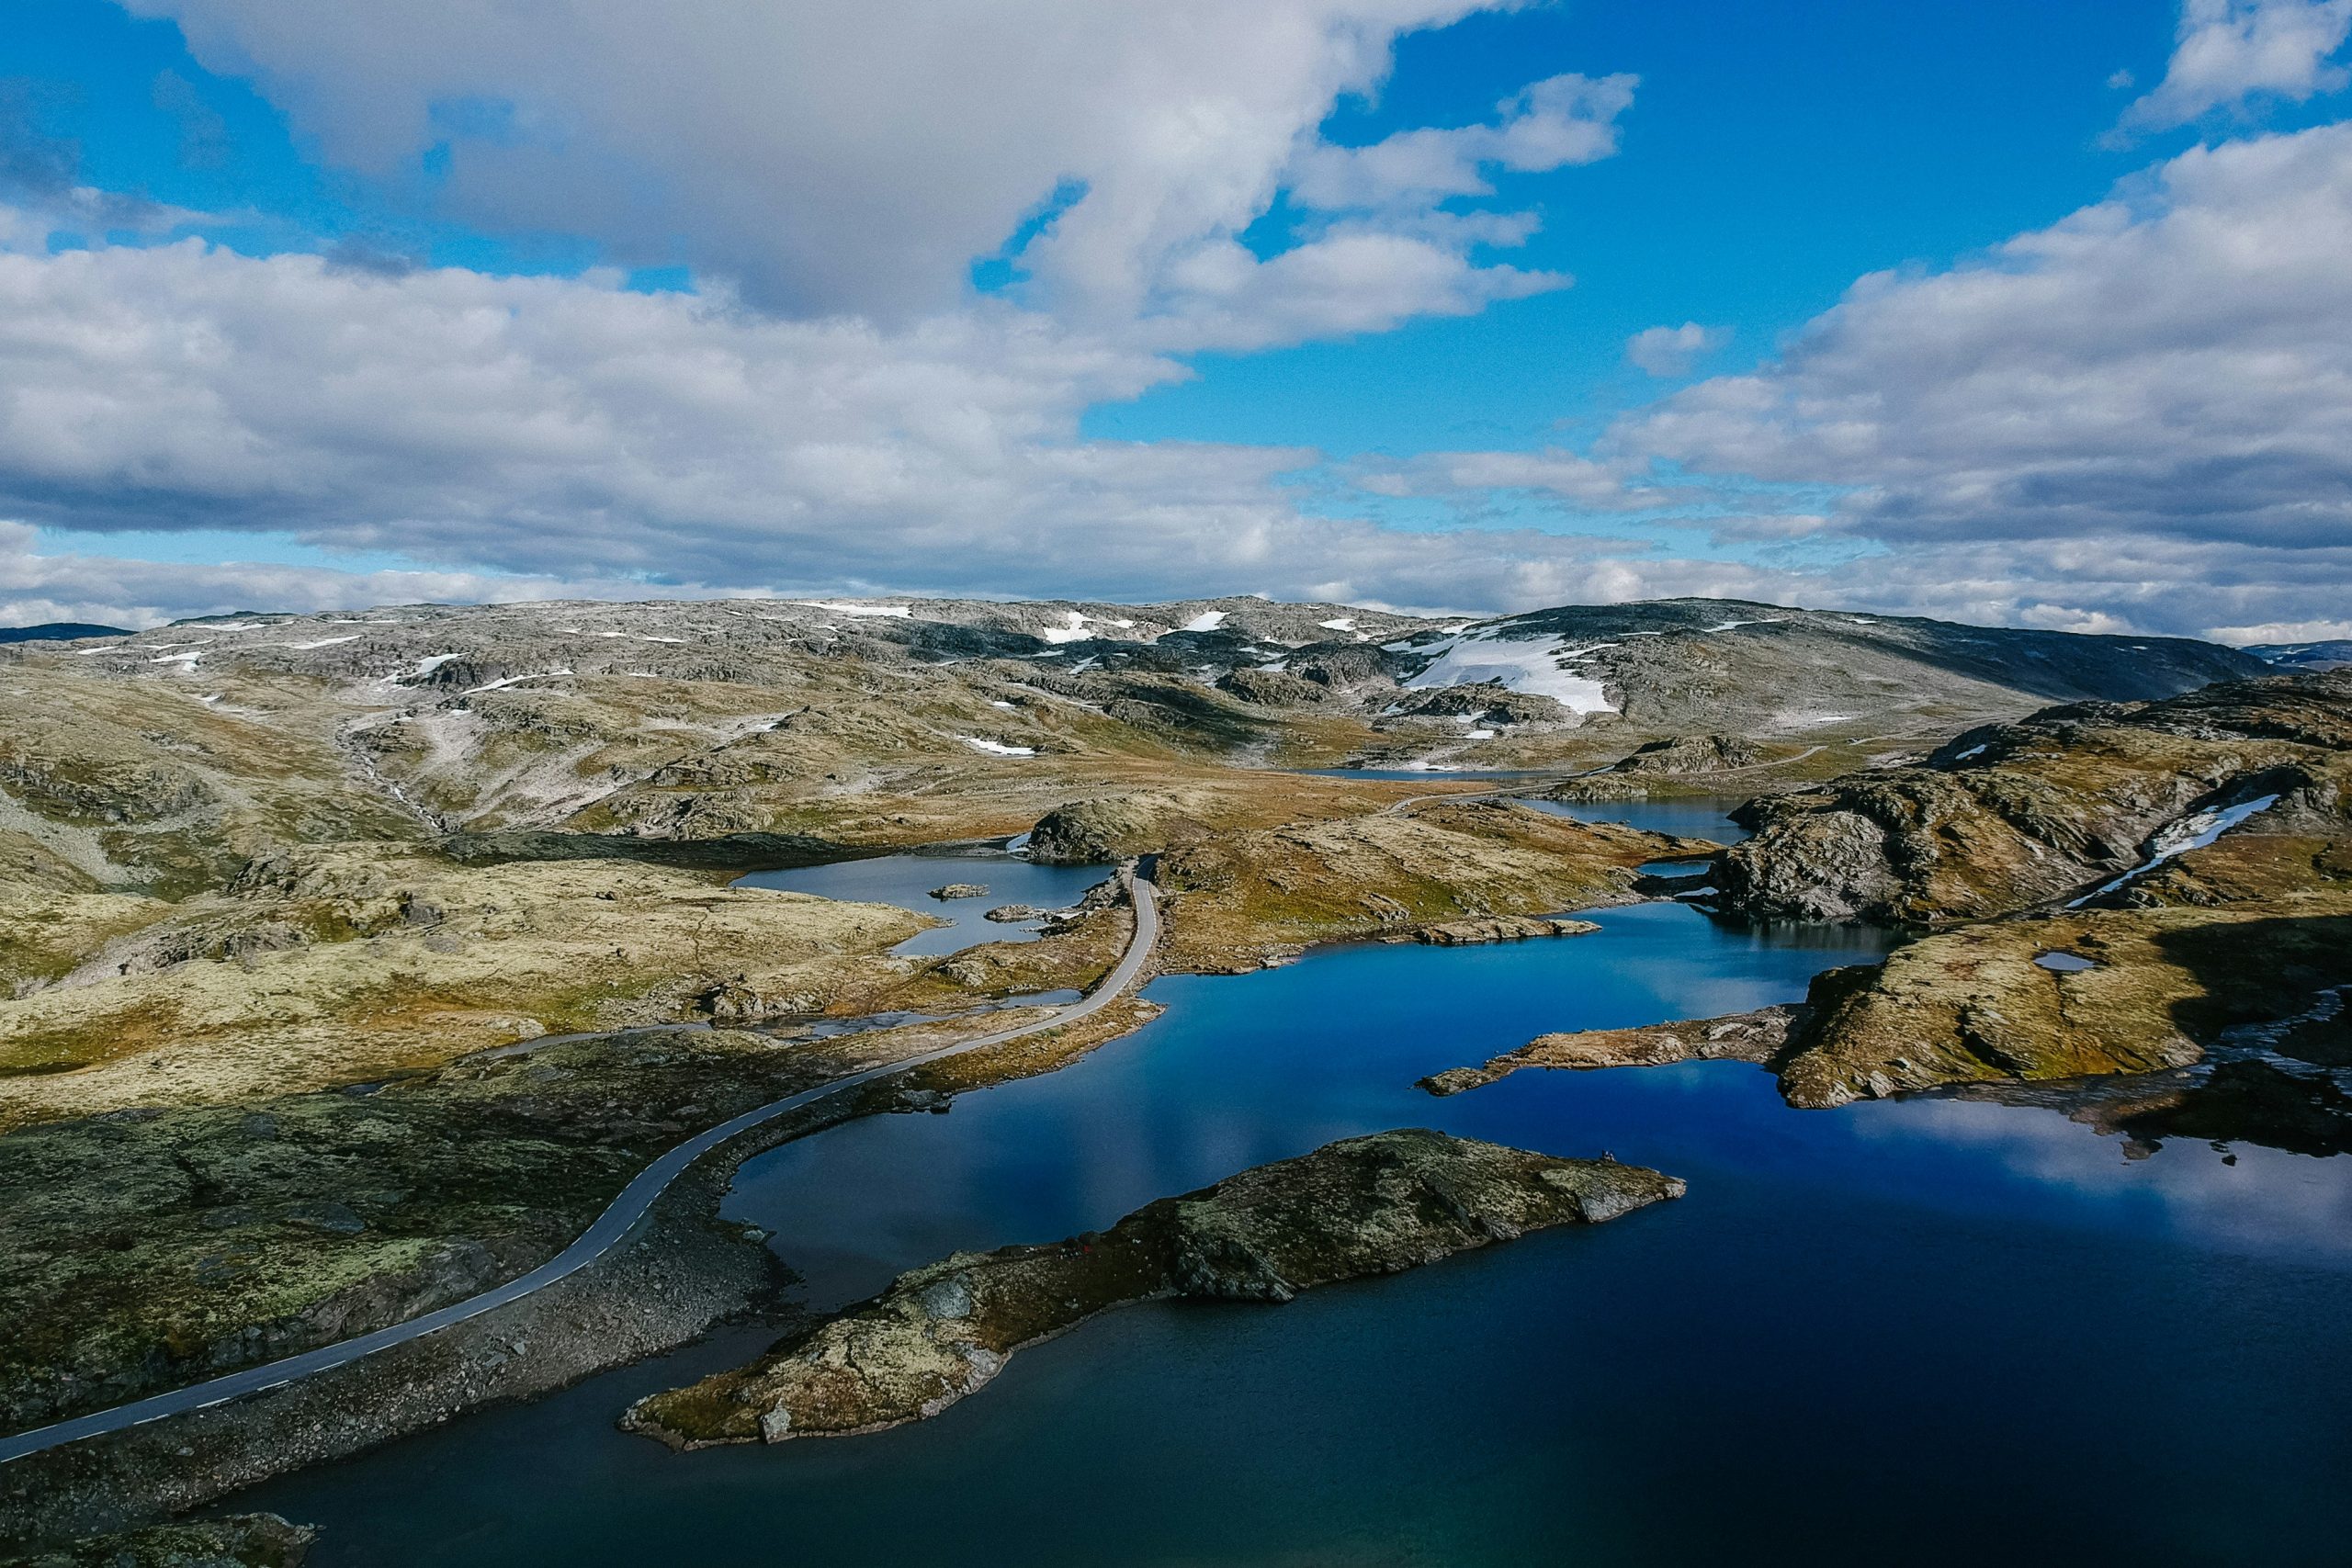 explore the stunning fjords of norway, with their towering cliffs and crystalline waters, on a breathtaking adventure in the heart of scandinavia.